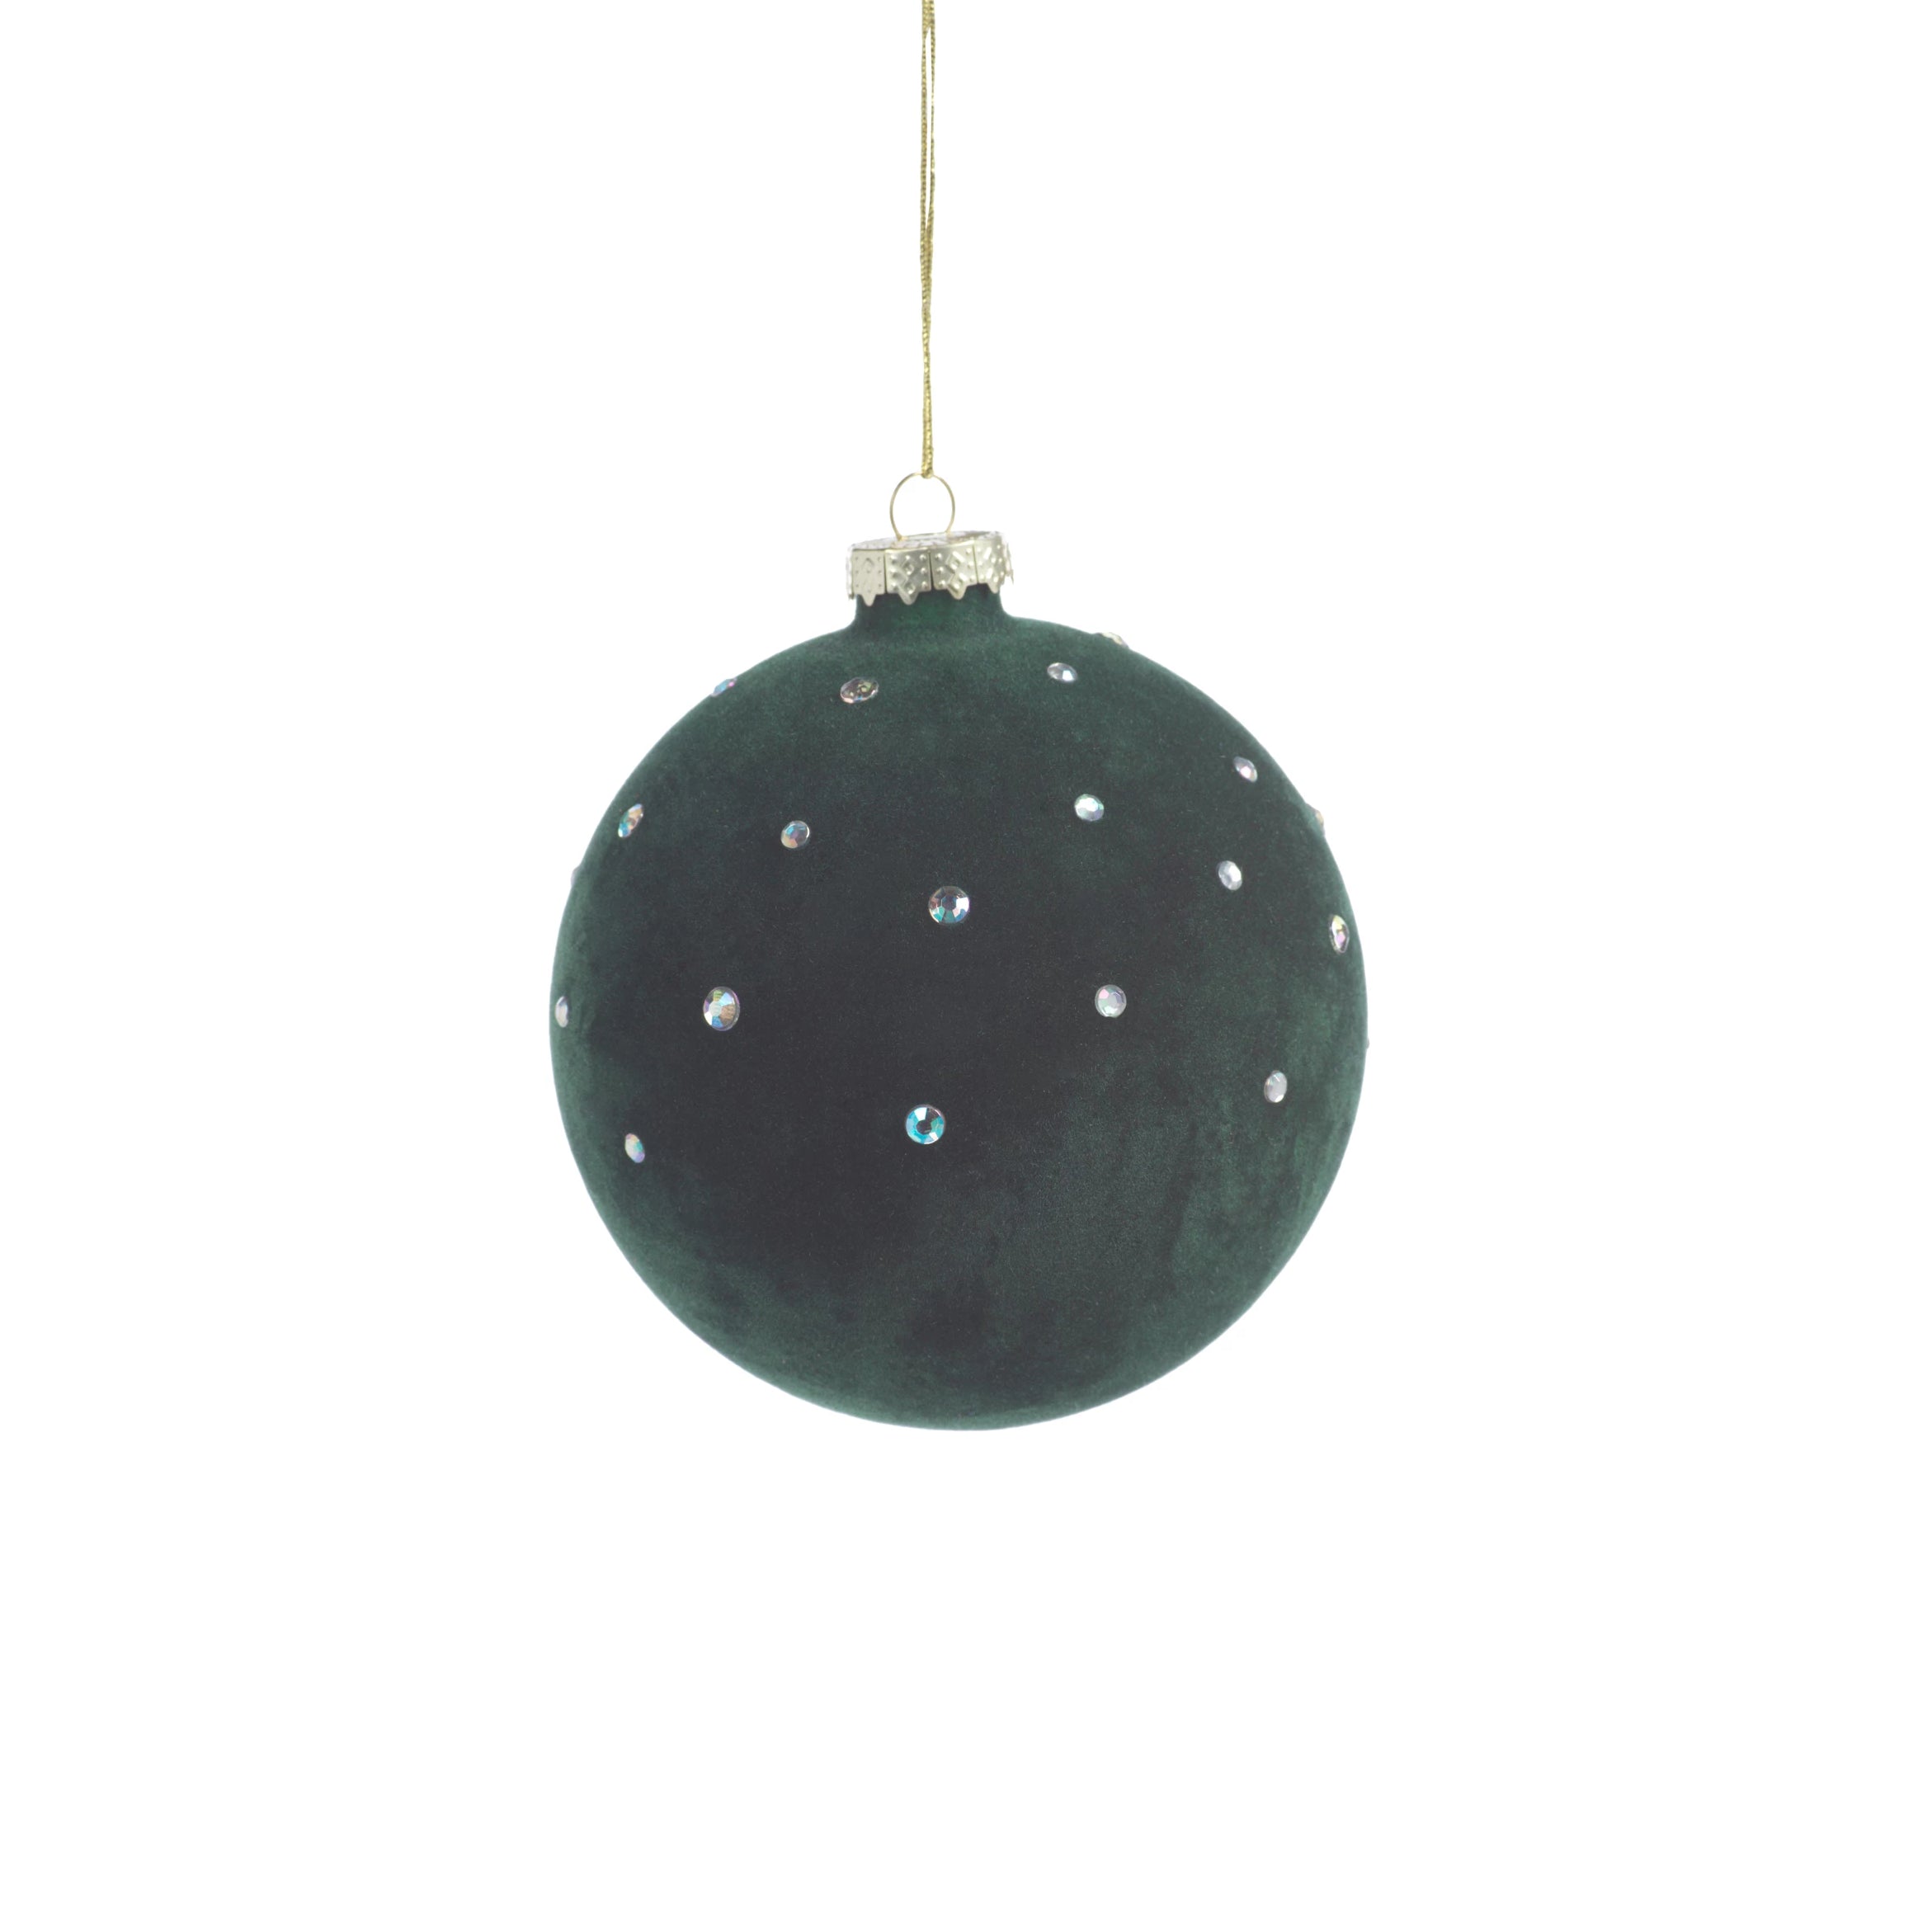 Flocked Ornament w/ Clear Studs - CARLYLE AVENUE